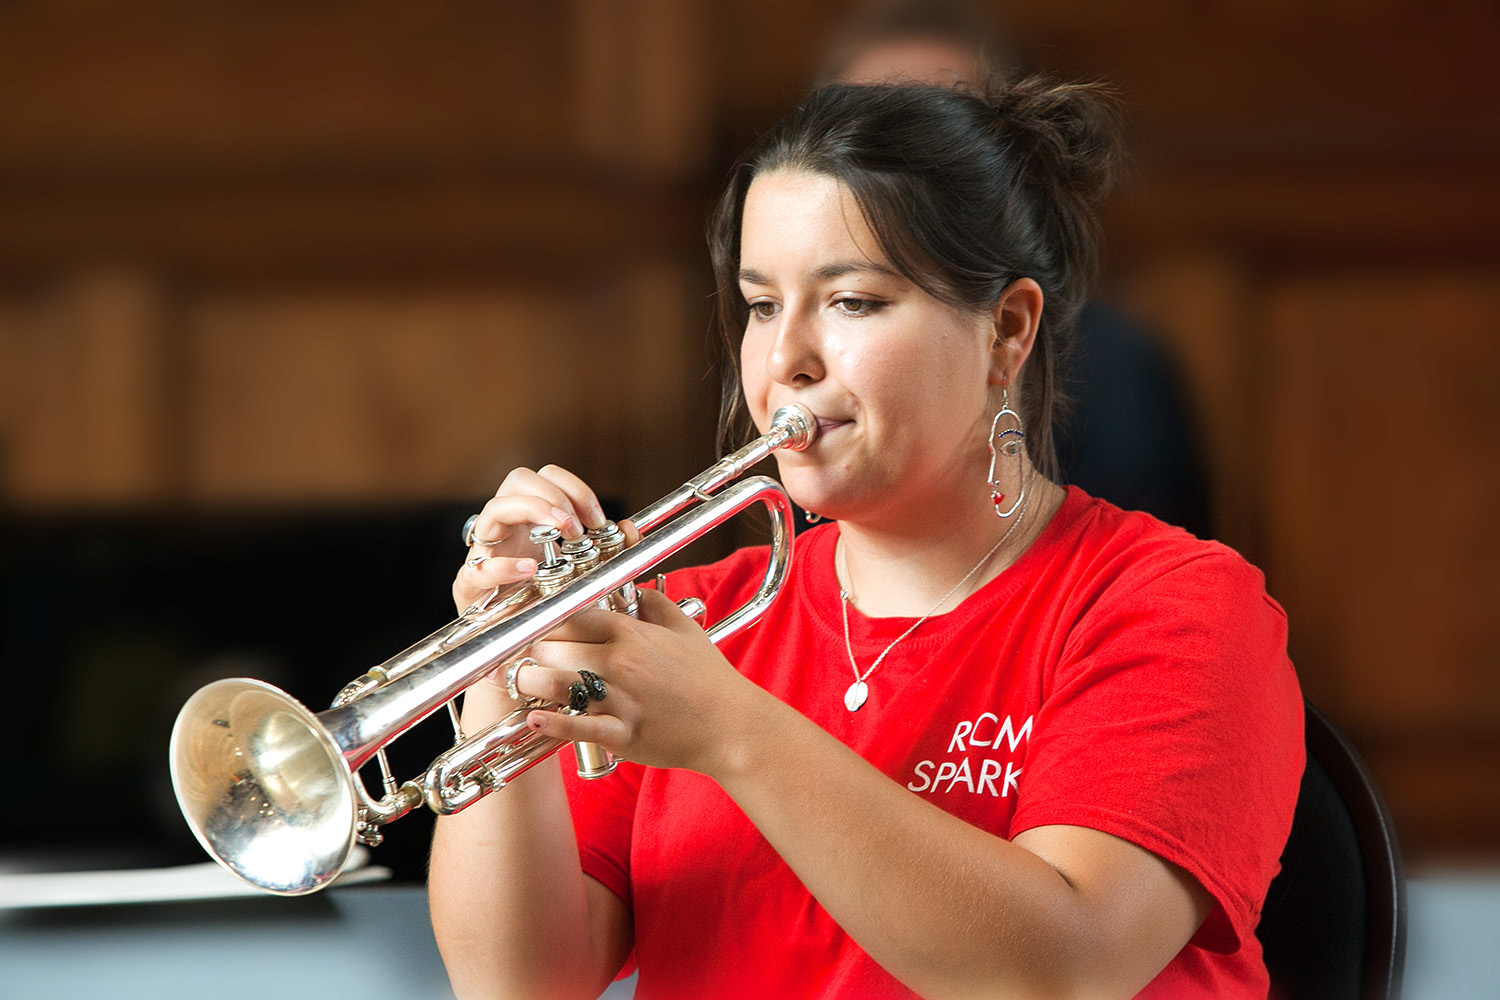 A lady wearing a red t-shirt plays a trumpet